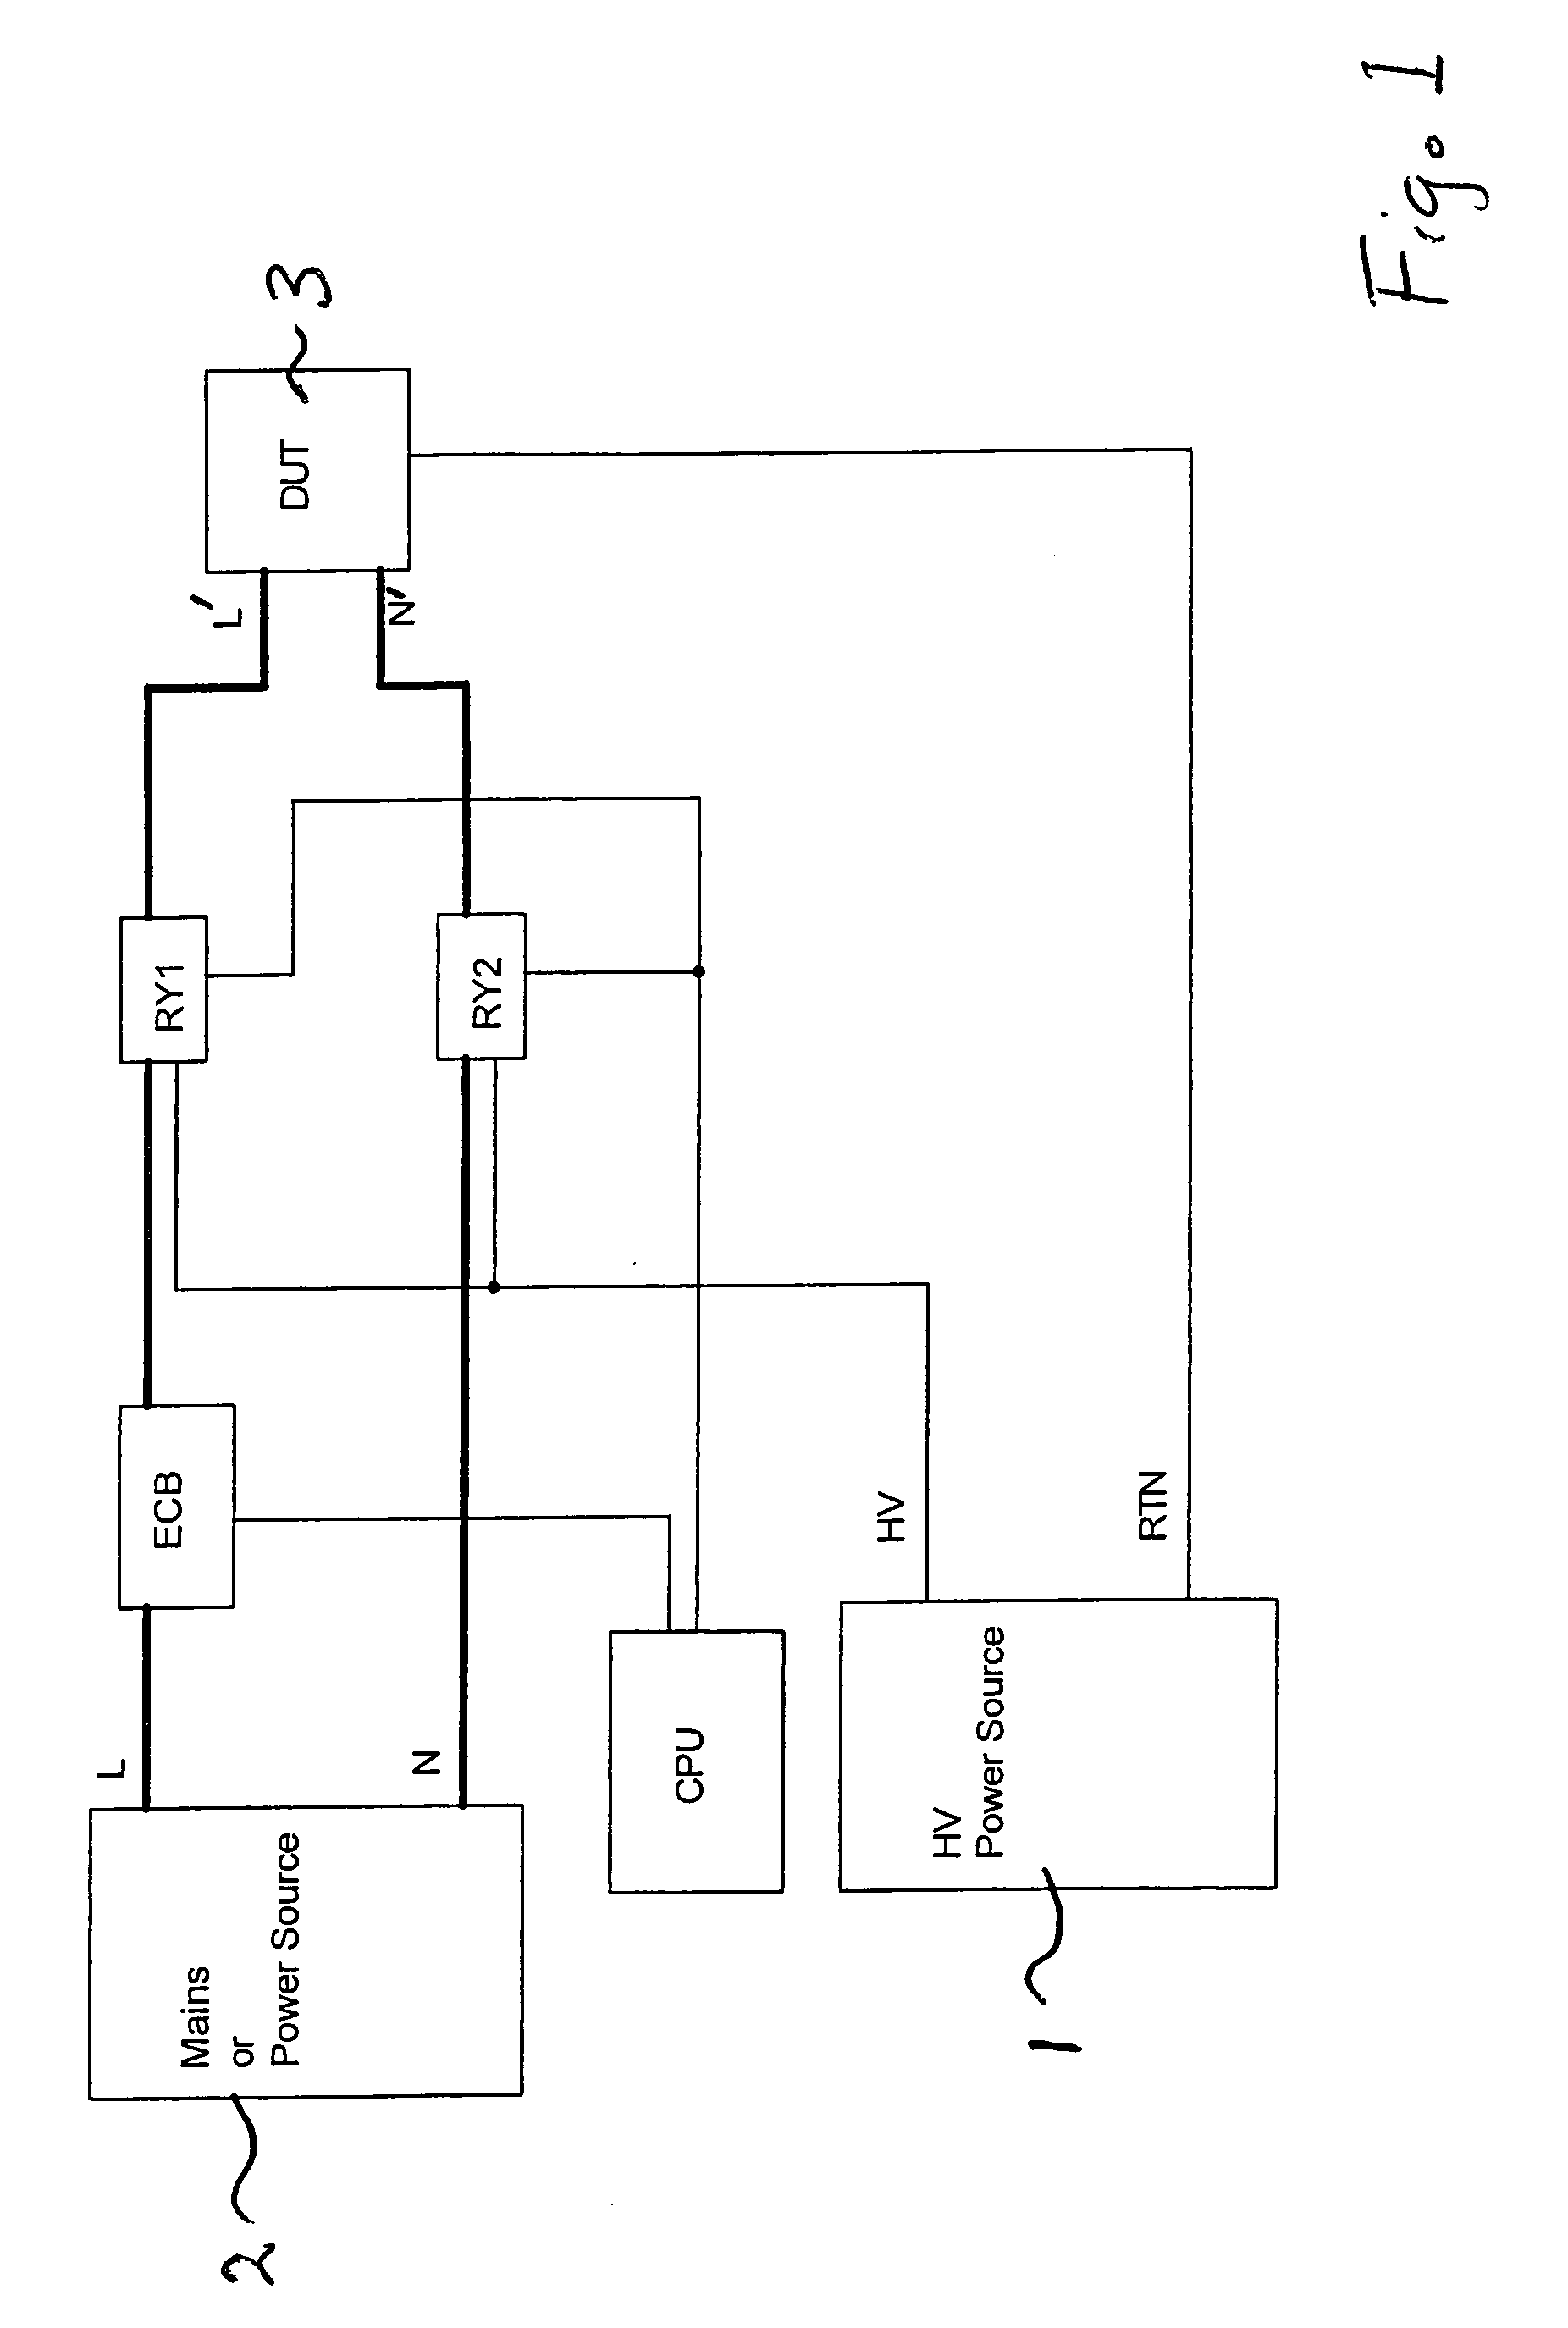 Safety tester having a high-voltage switching relay protected by an in-line electronic circuit breaker